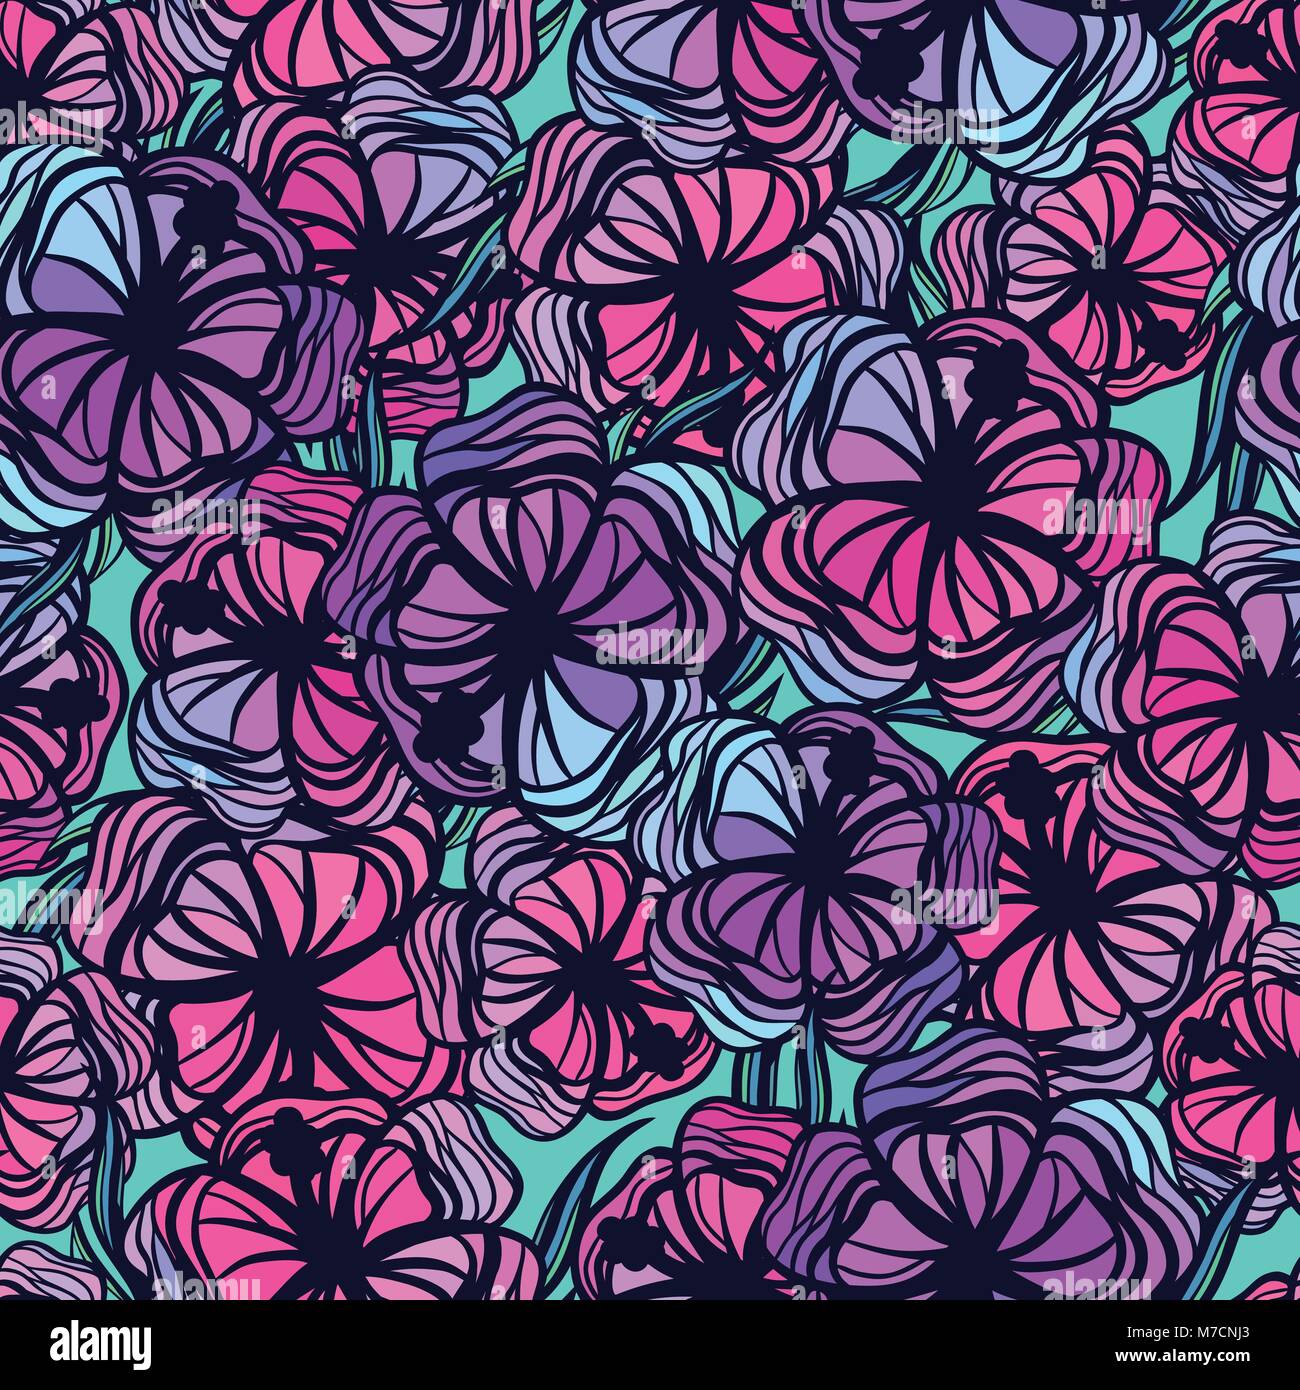 Seamless pattern with stylized colored tropical flowers Stock Vector